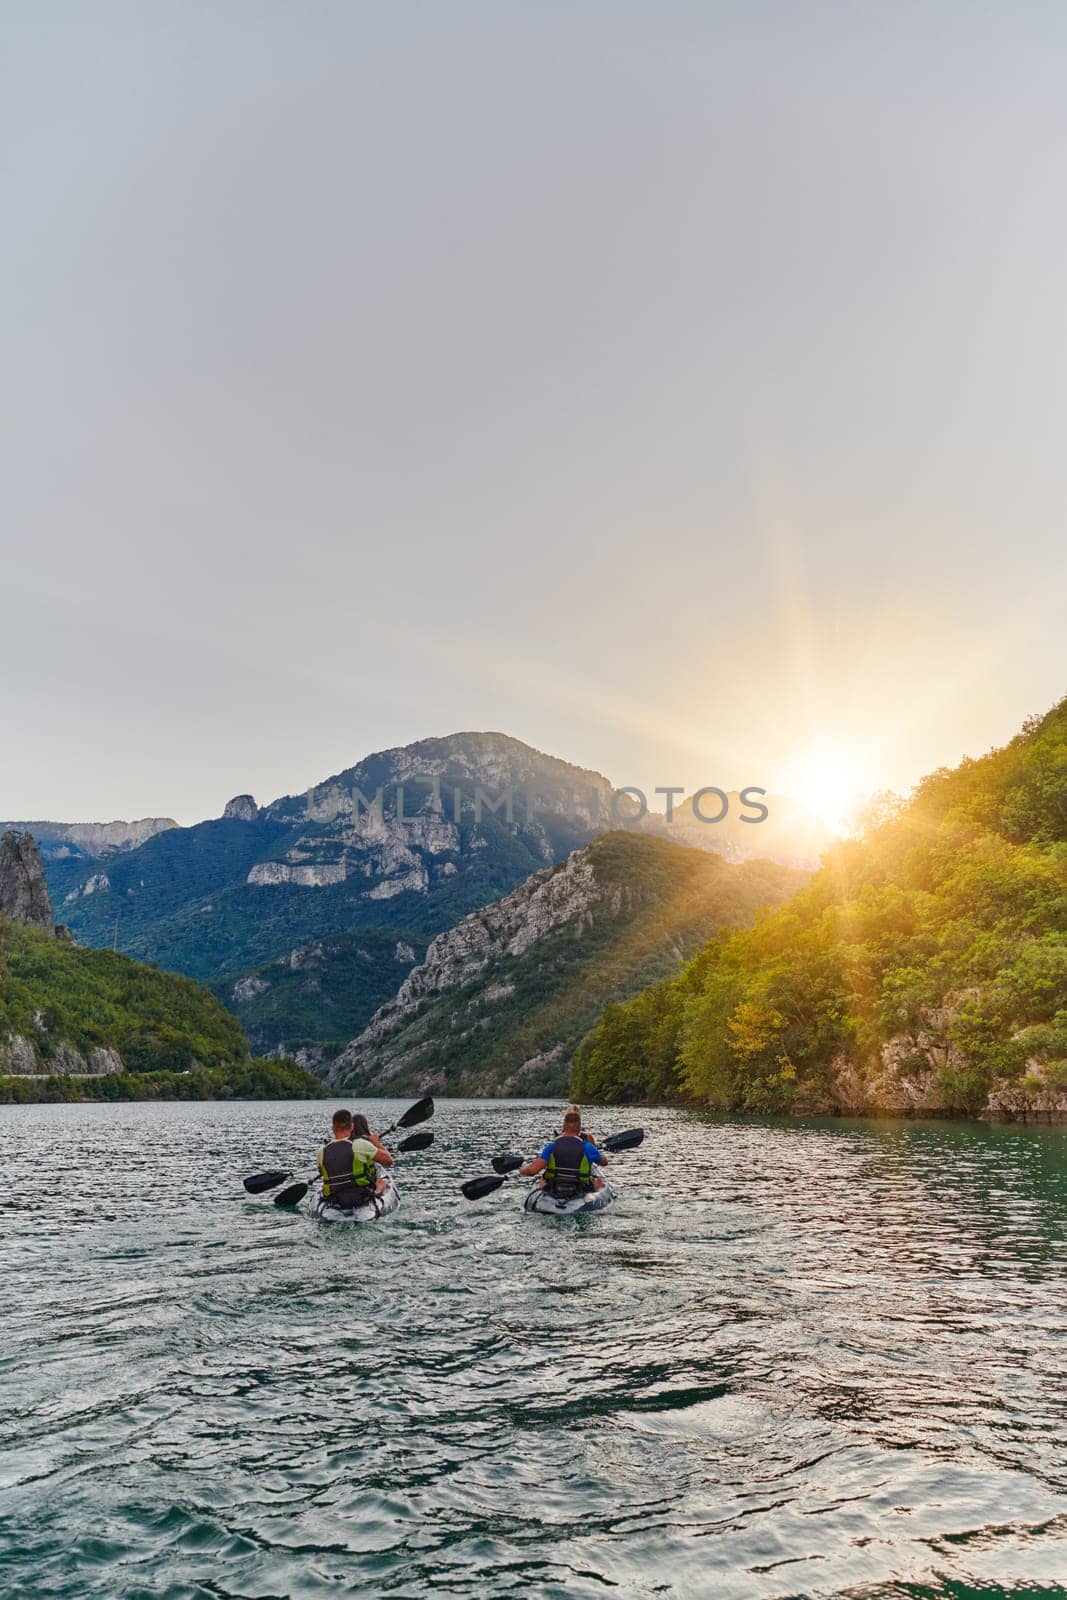 A group of friends enjoying fun and kayaking exploring the calm river, surrounding forest and large natural river canyons during an idyllic sunset. by dotshock